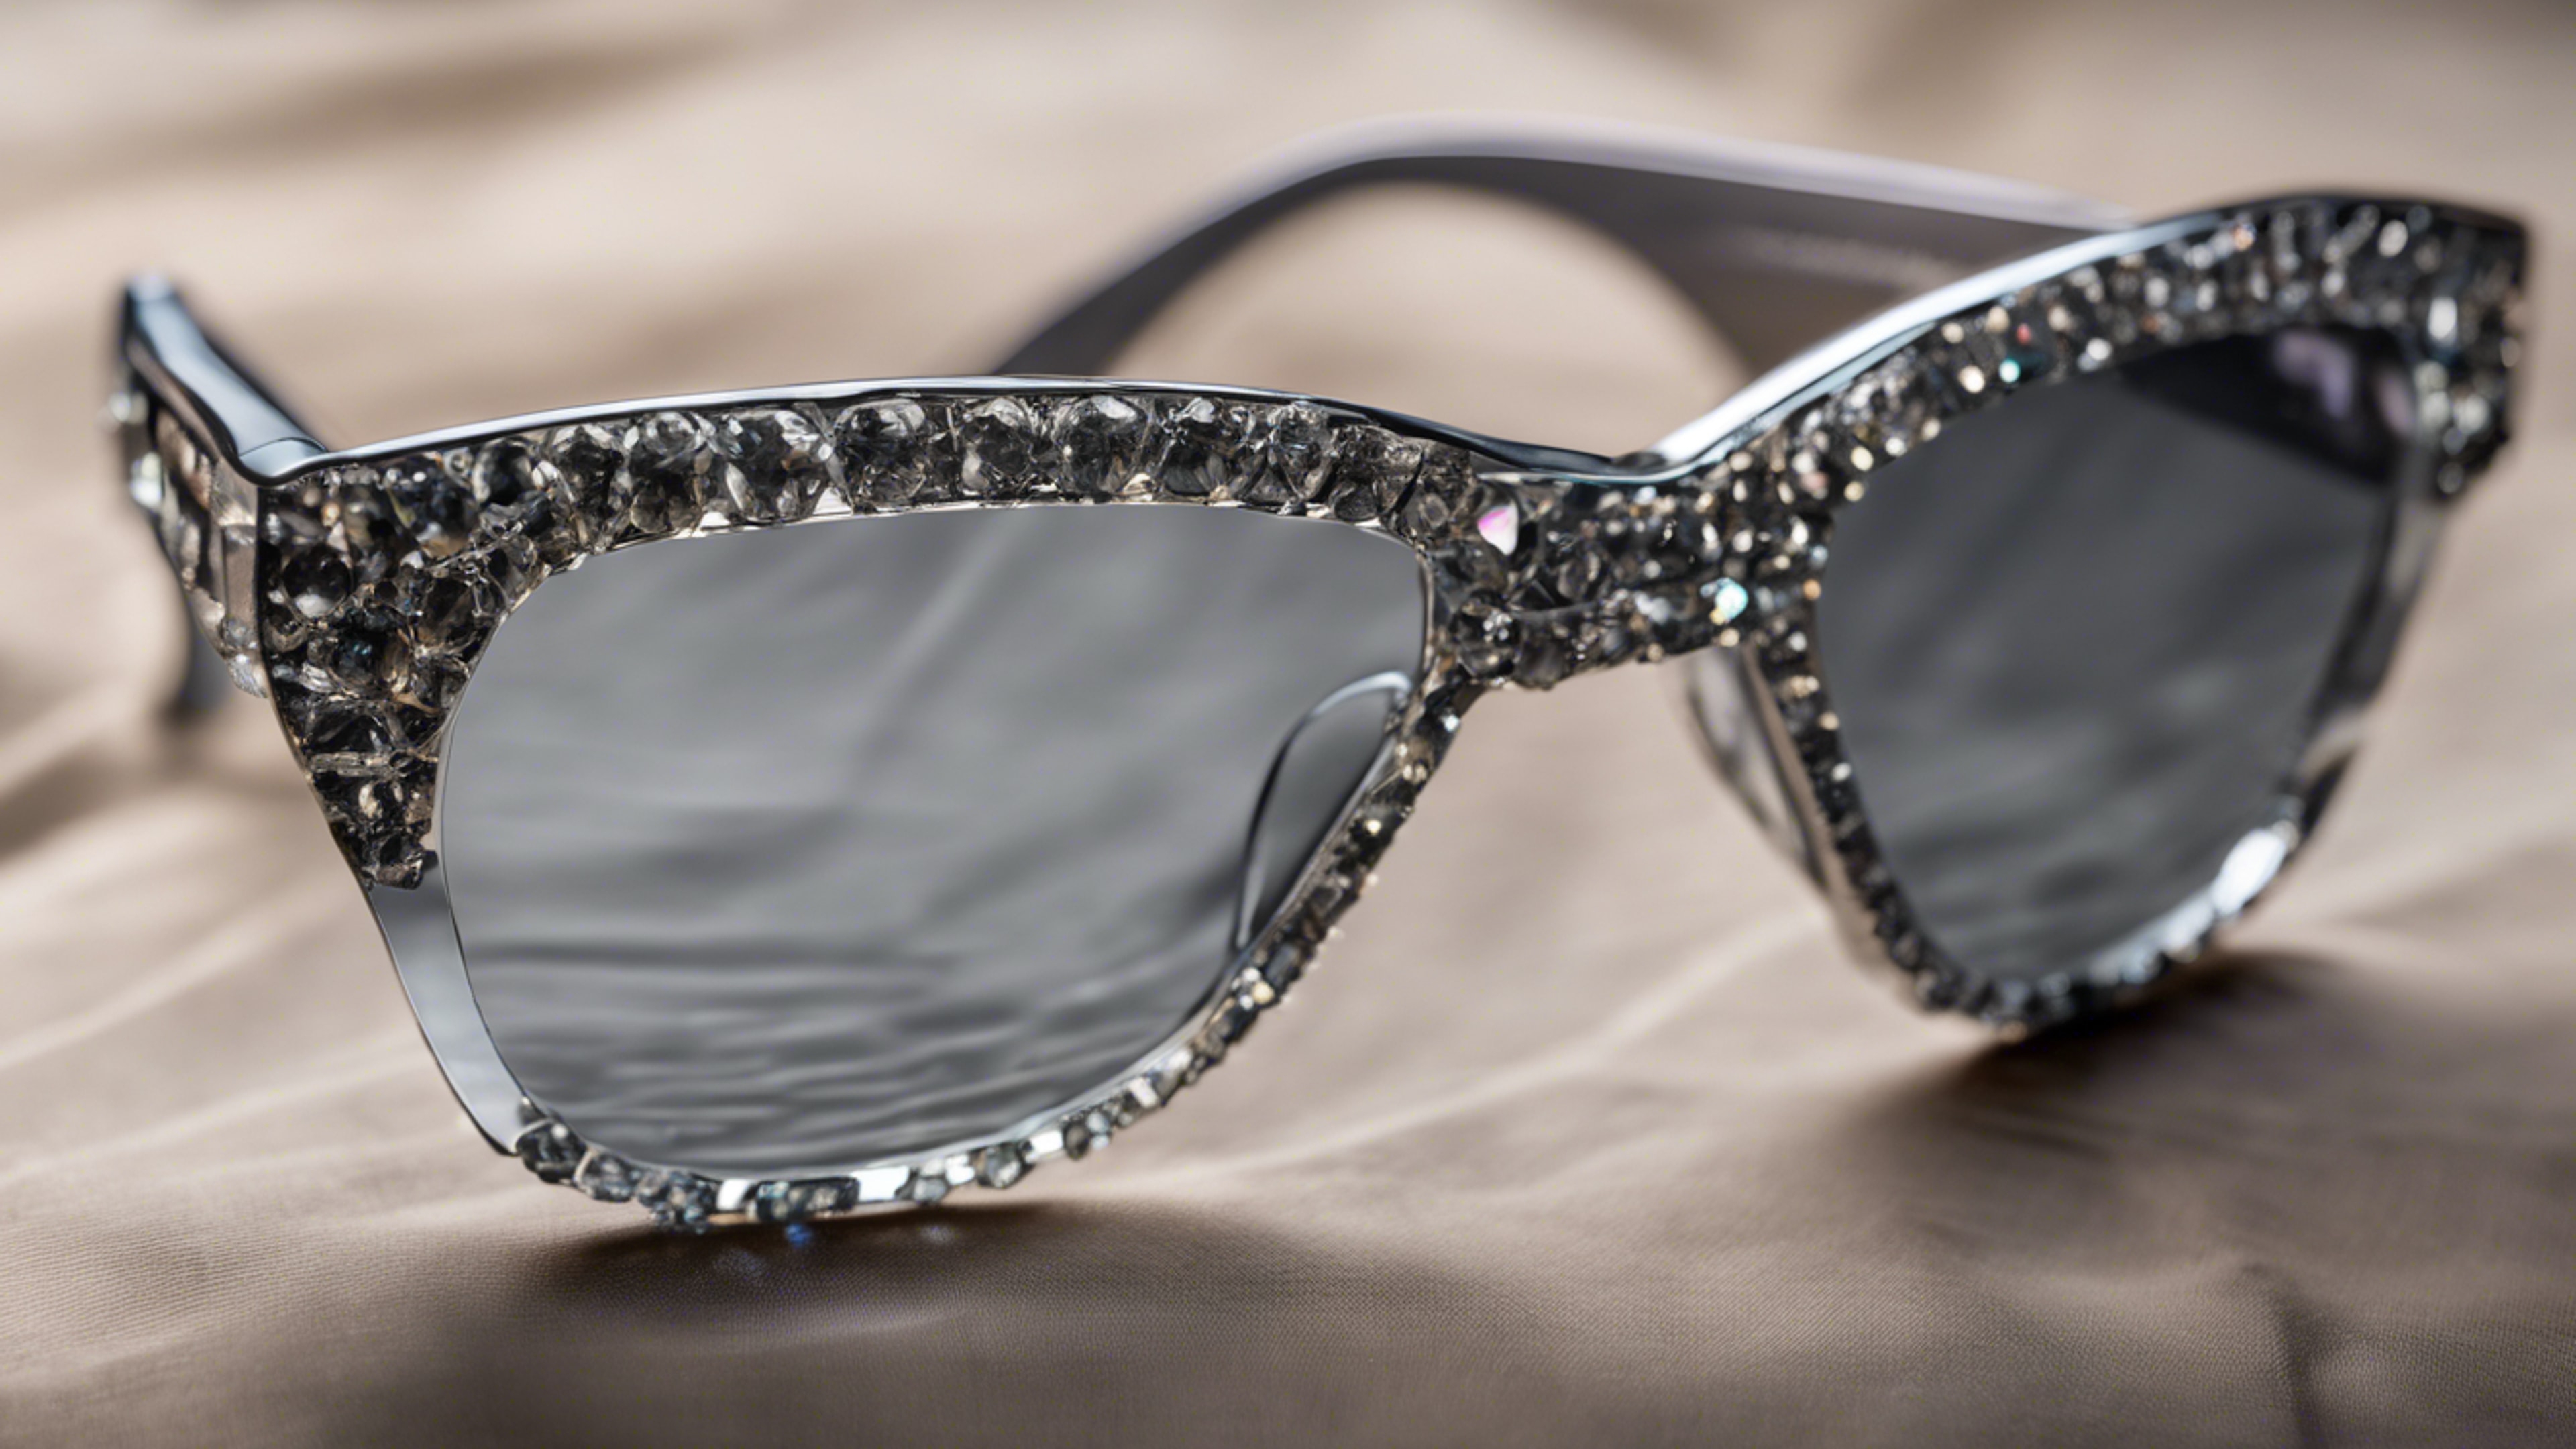 A pair of gray diamond encrusted glasses, epitomizing luxury and status. Wallpaper[6d0b74d92658455f9dbd]